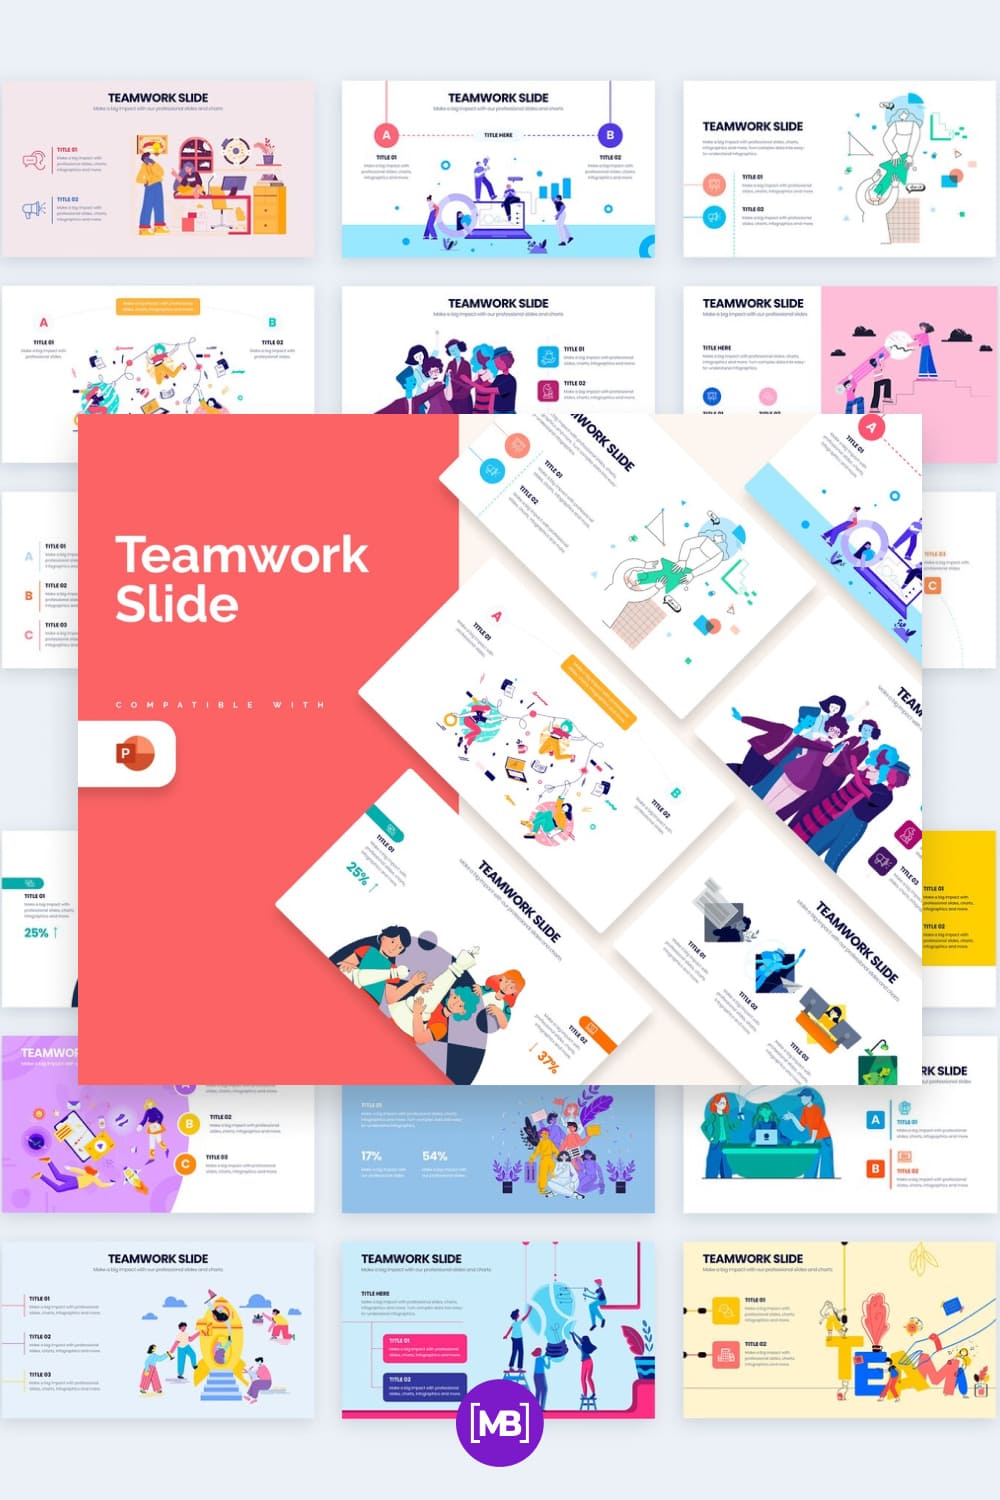 Teamwork infographic slides template for powerpoint.